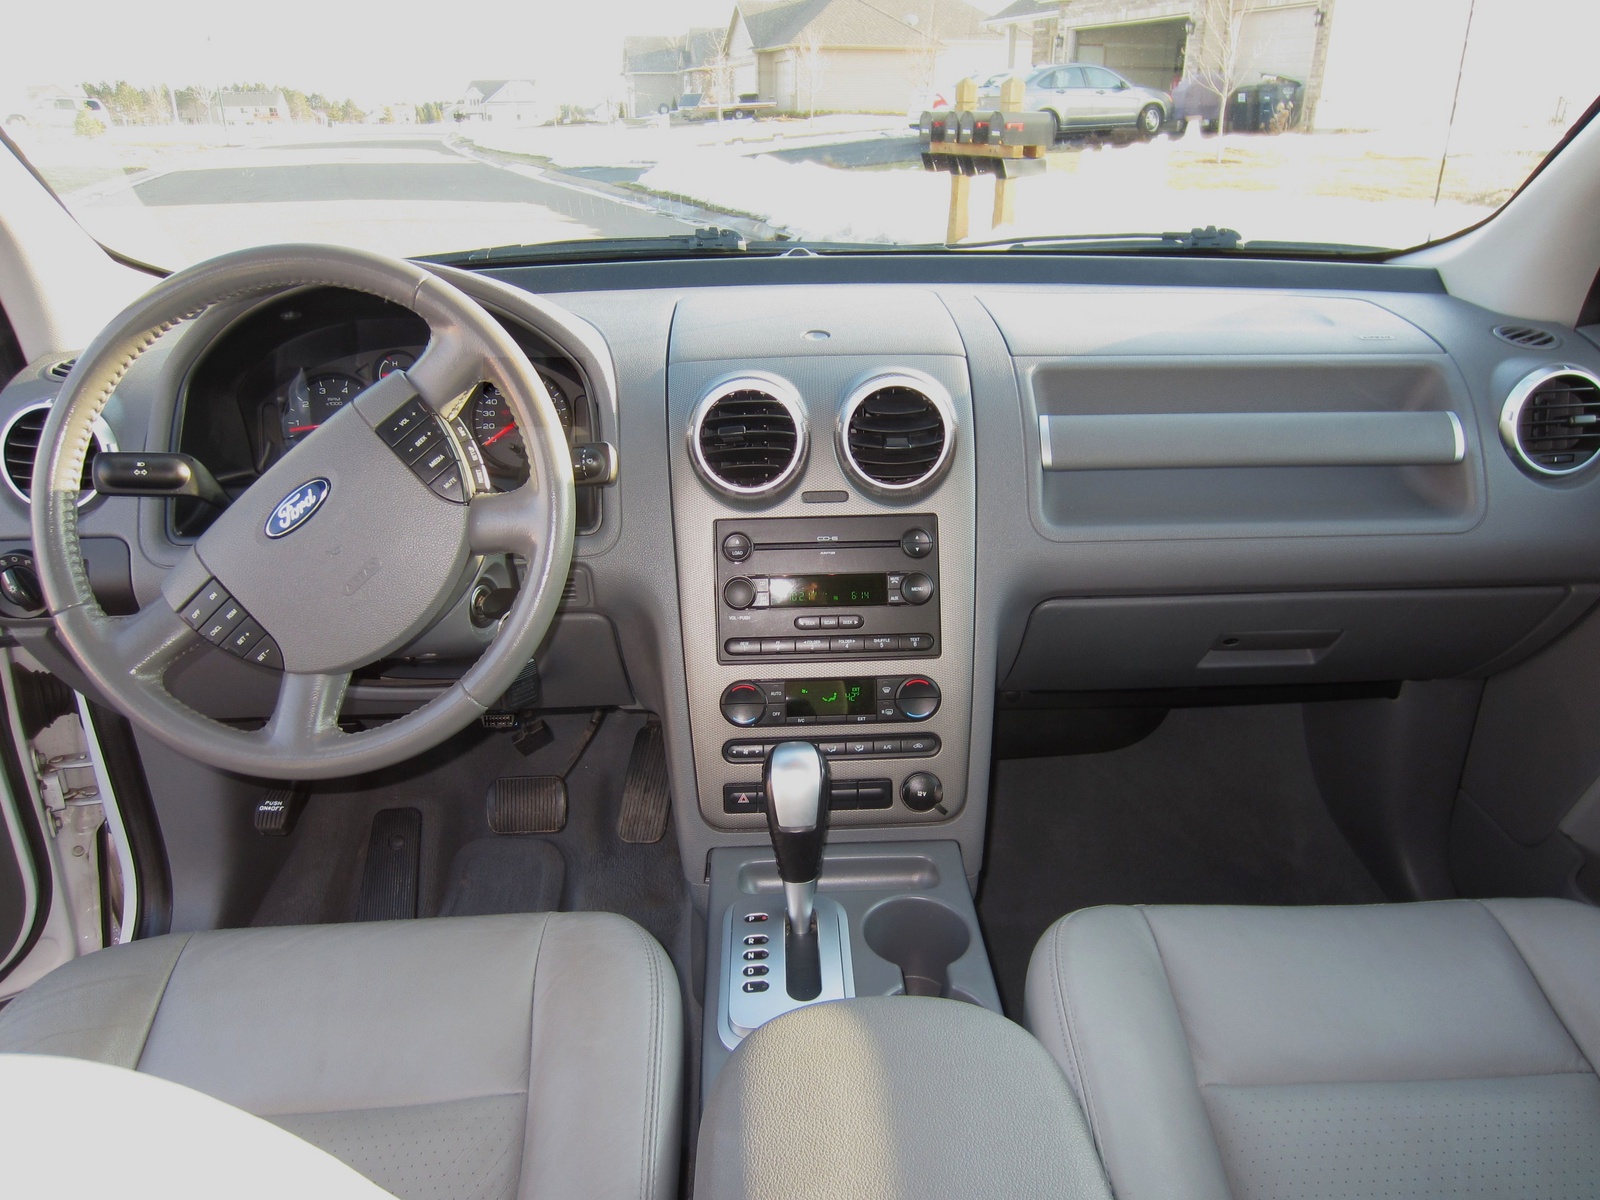 Ford freestyle pictures interior #1